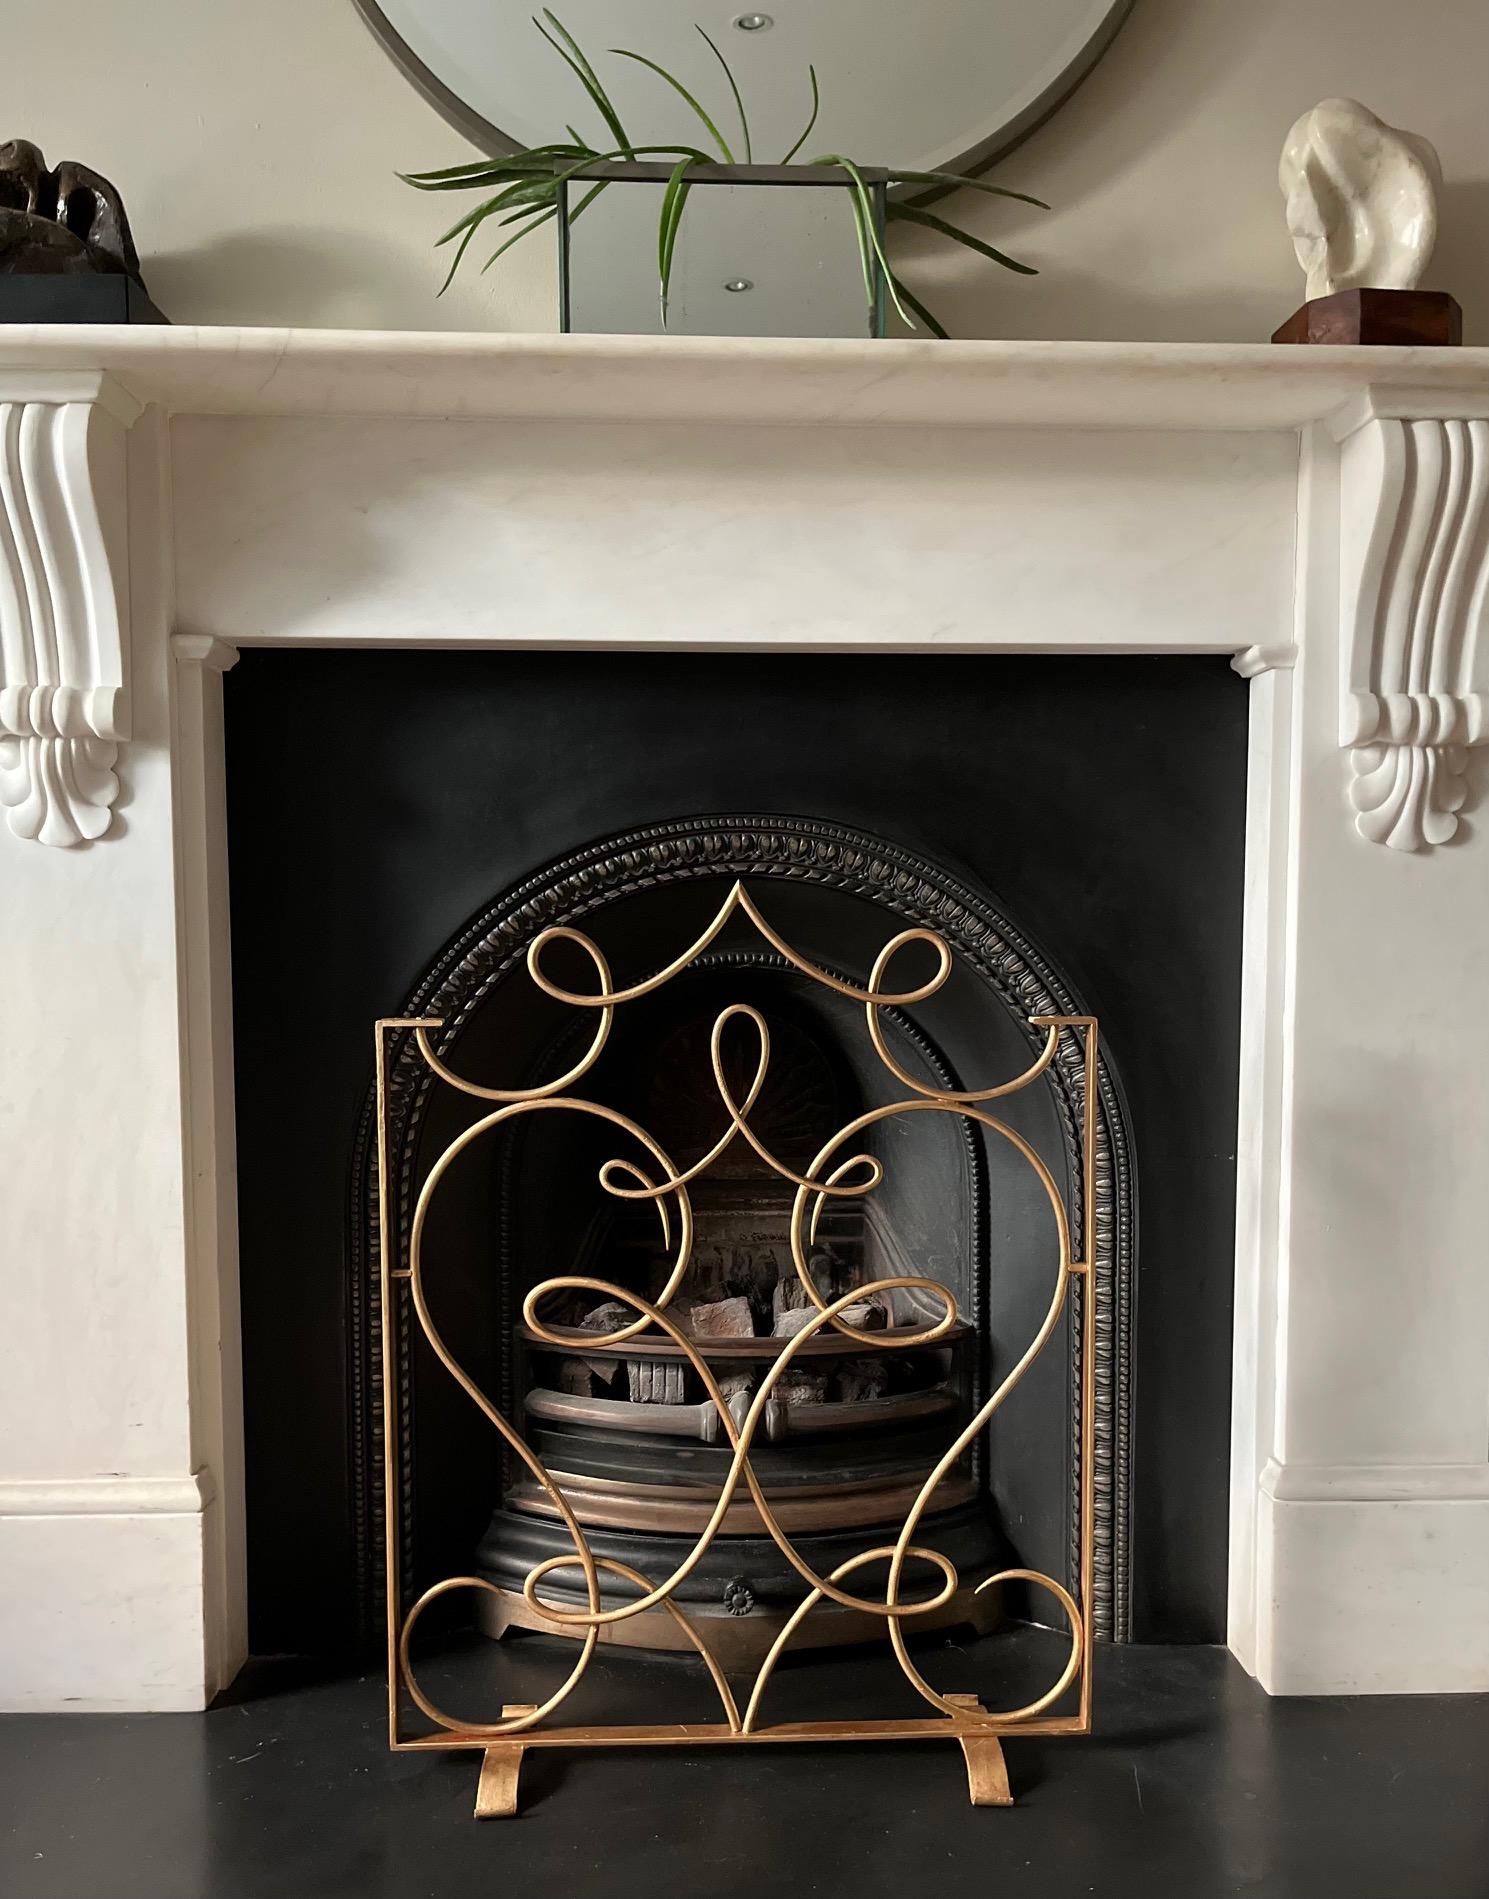 An elegant French 1930's wrought iron, regilded firescreen, fireguard. Highly decorative. Designed by the French designer Rene Prou.